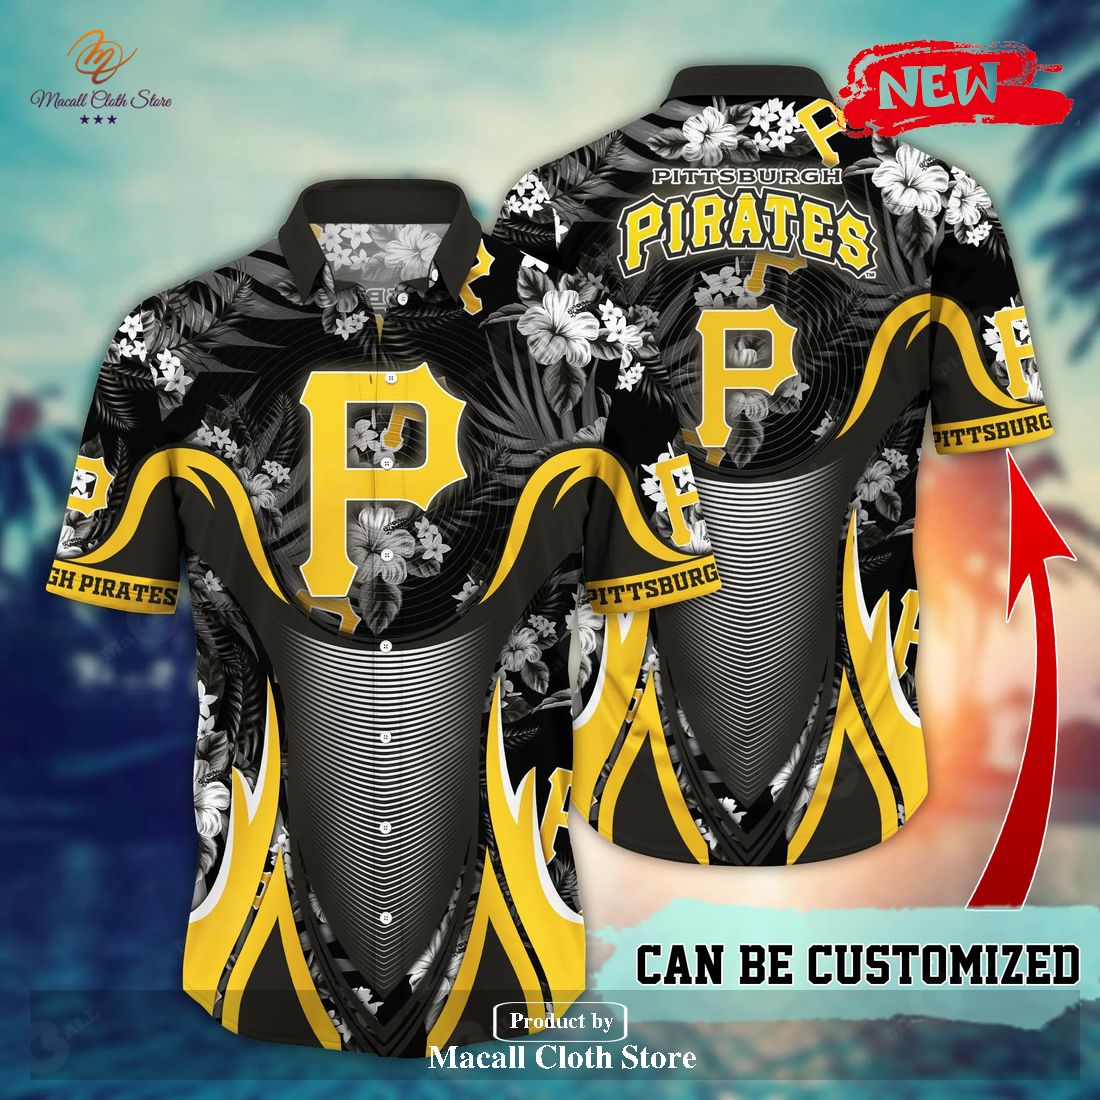 Pittsburgh Pirates MLB Jersey Shirt Custom Number And Name For Men And Women  Gift Fans - Freedomdesign